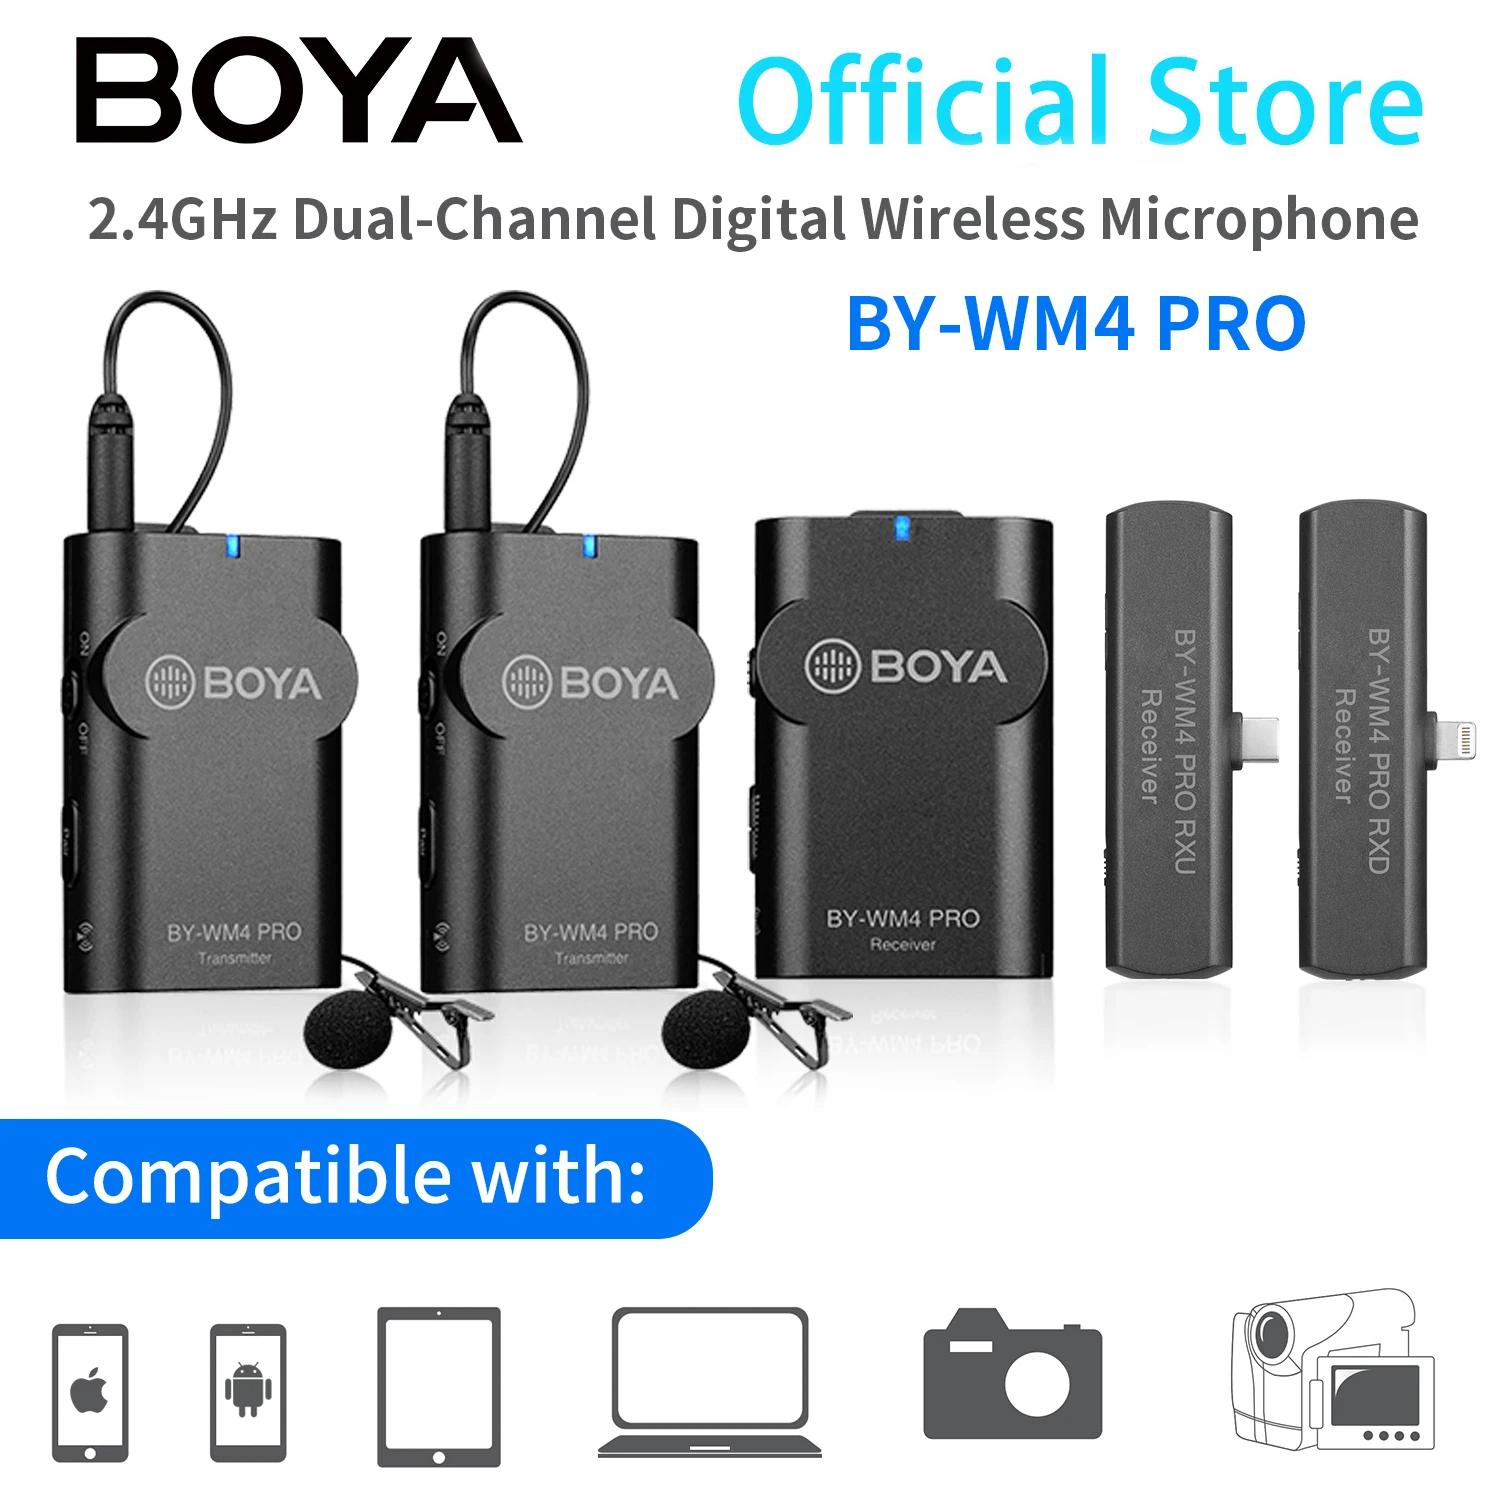 BOYA BY-WM4 PRO 2.4GHz Condenser Wireless Lavalier Lapel Microphone for PC iPhone Android Xiaomi DSLRs Camera Youtube Streaming